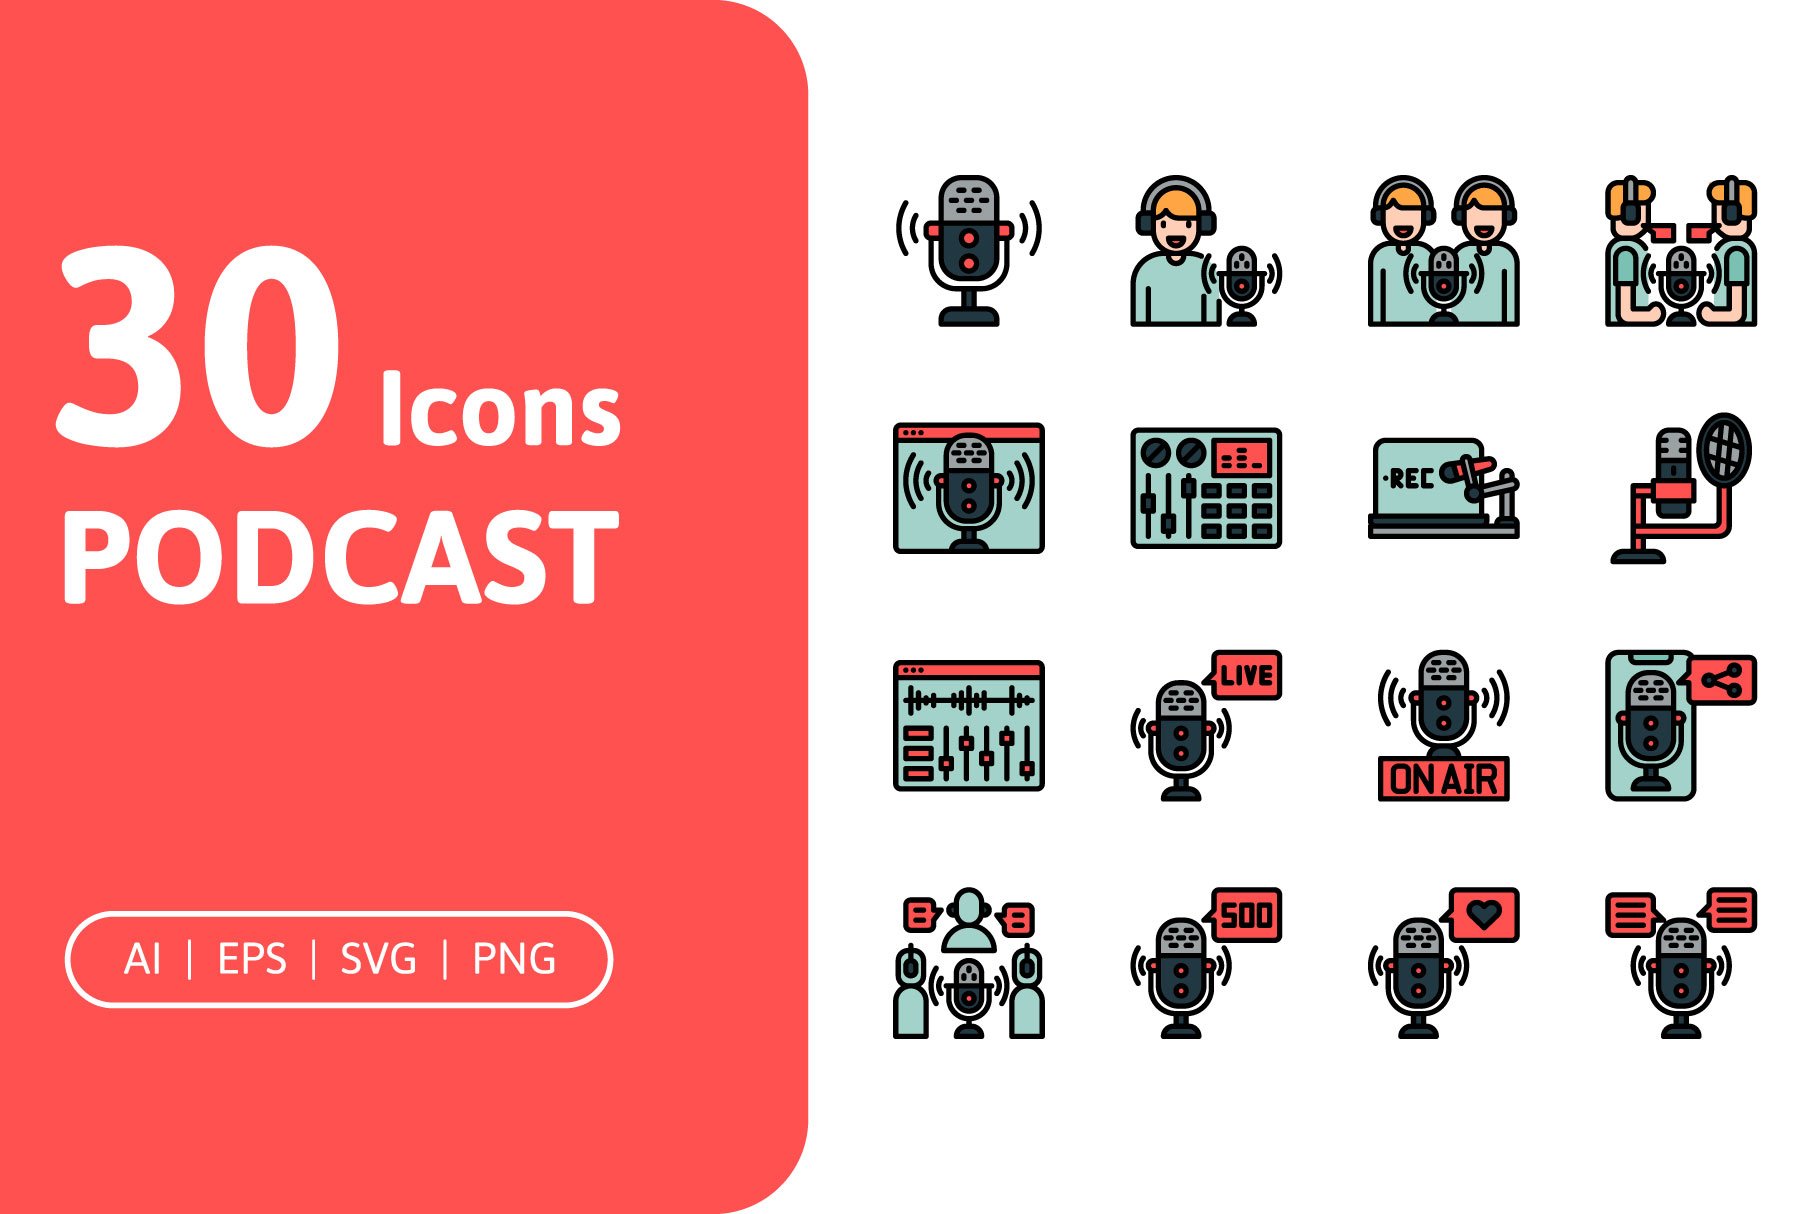 30 Podcast Icons cover image.